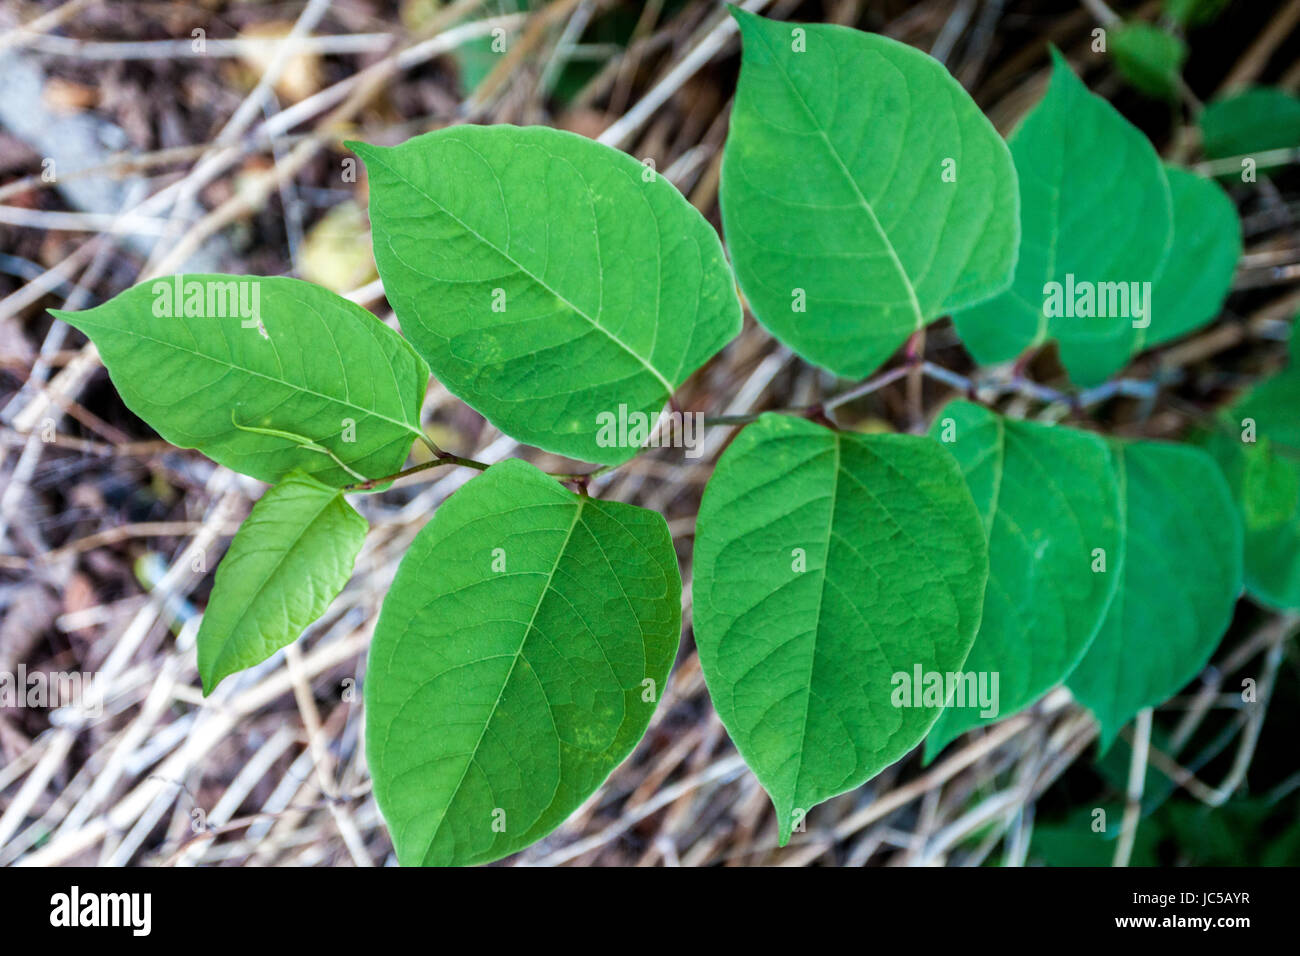 Japanese Knotweed, Fallopia japonica Reynoutria japonica, young leaves, invasive plant Stock Photo